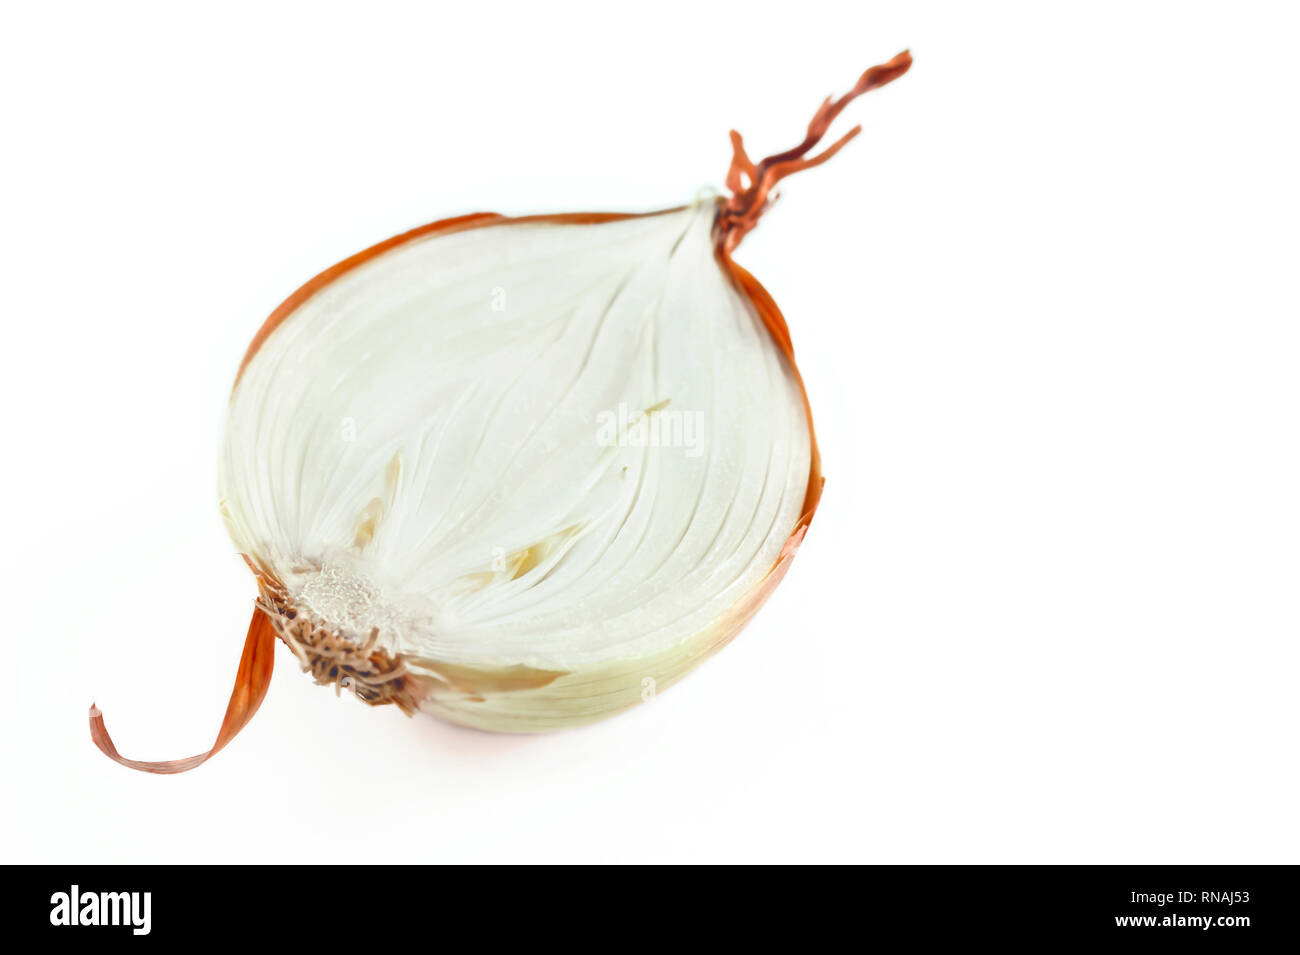 Bulb Onion, Allium cepa, cut in half with visible scale leaves, basal plate, fibrous roots and curly tunic isolated on white background. Healthy Organ Stock Photo